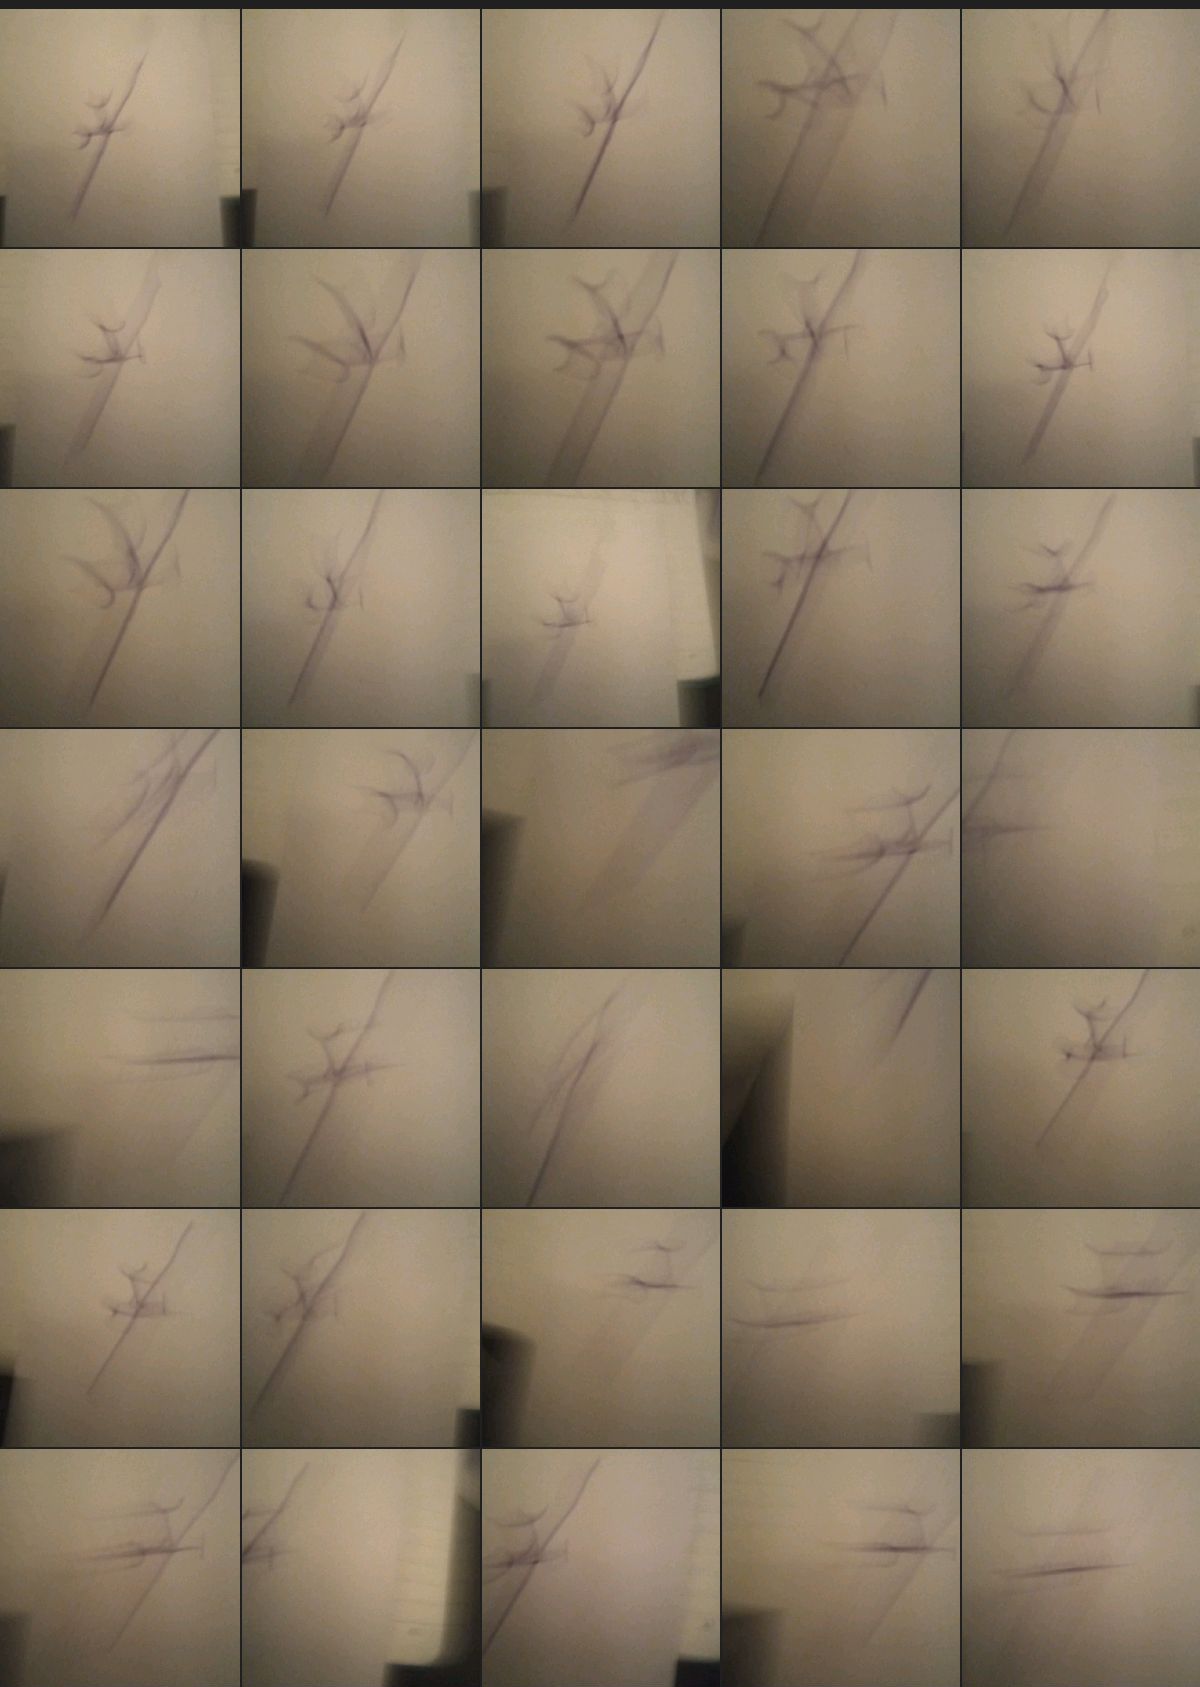 blurry images of a sigil losing itself to the moment